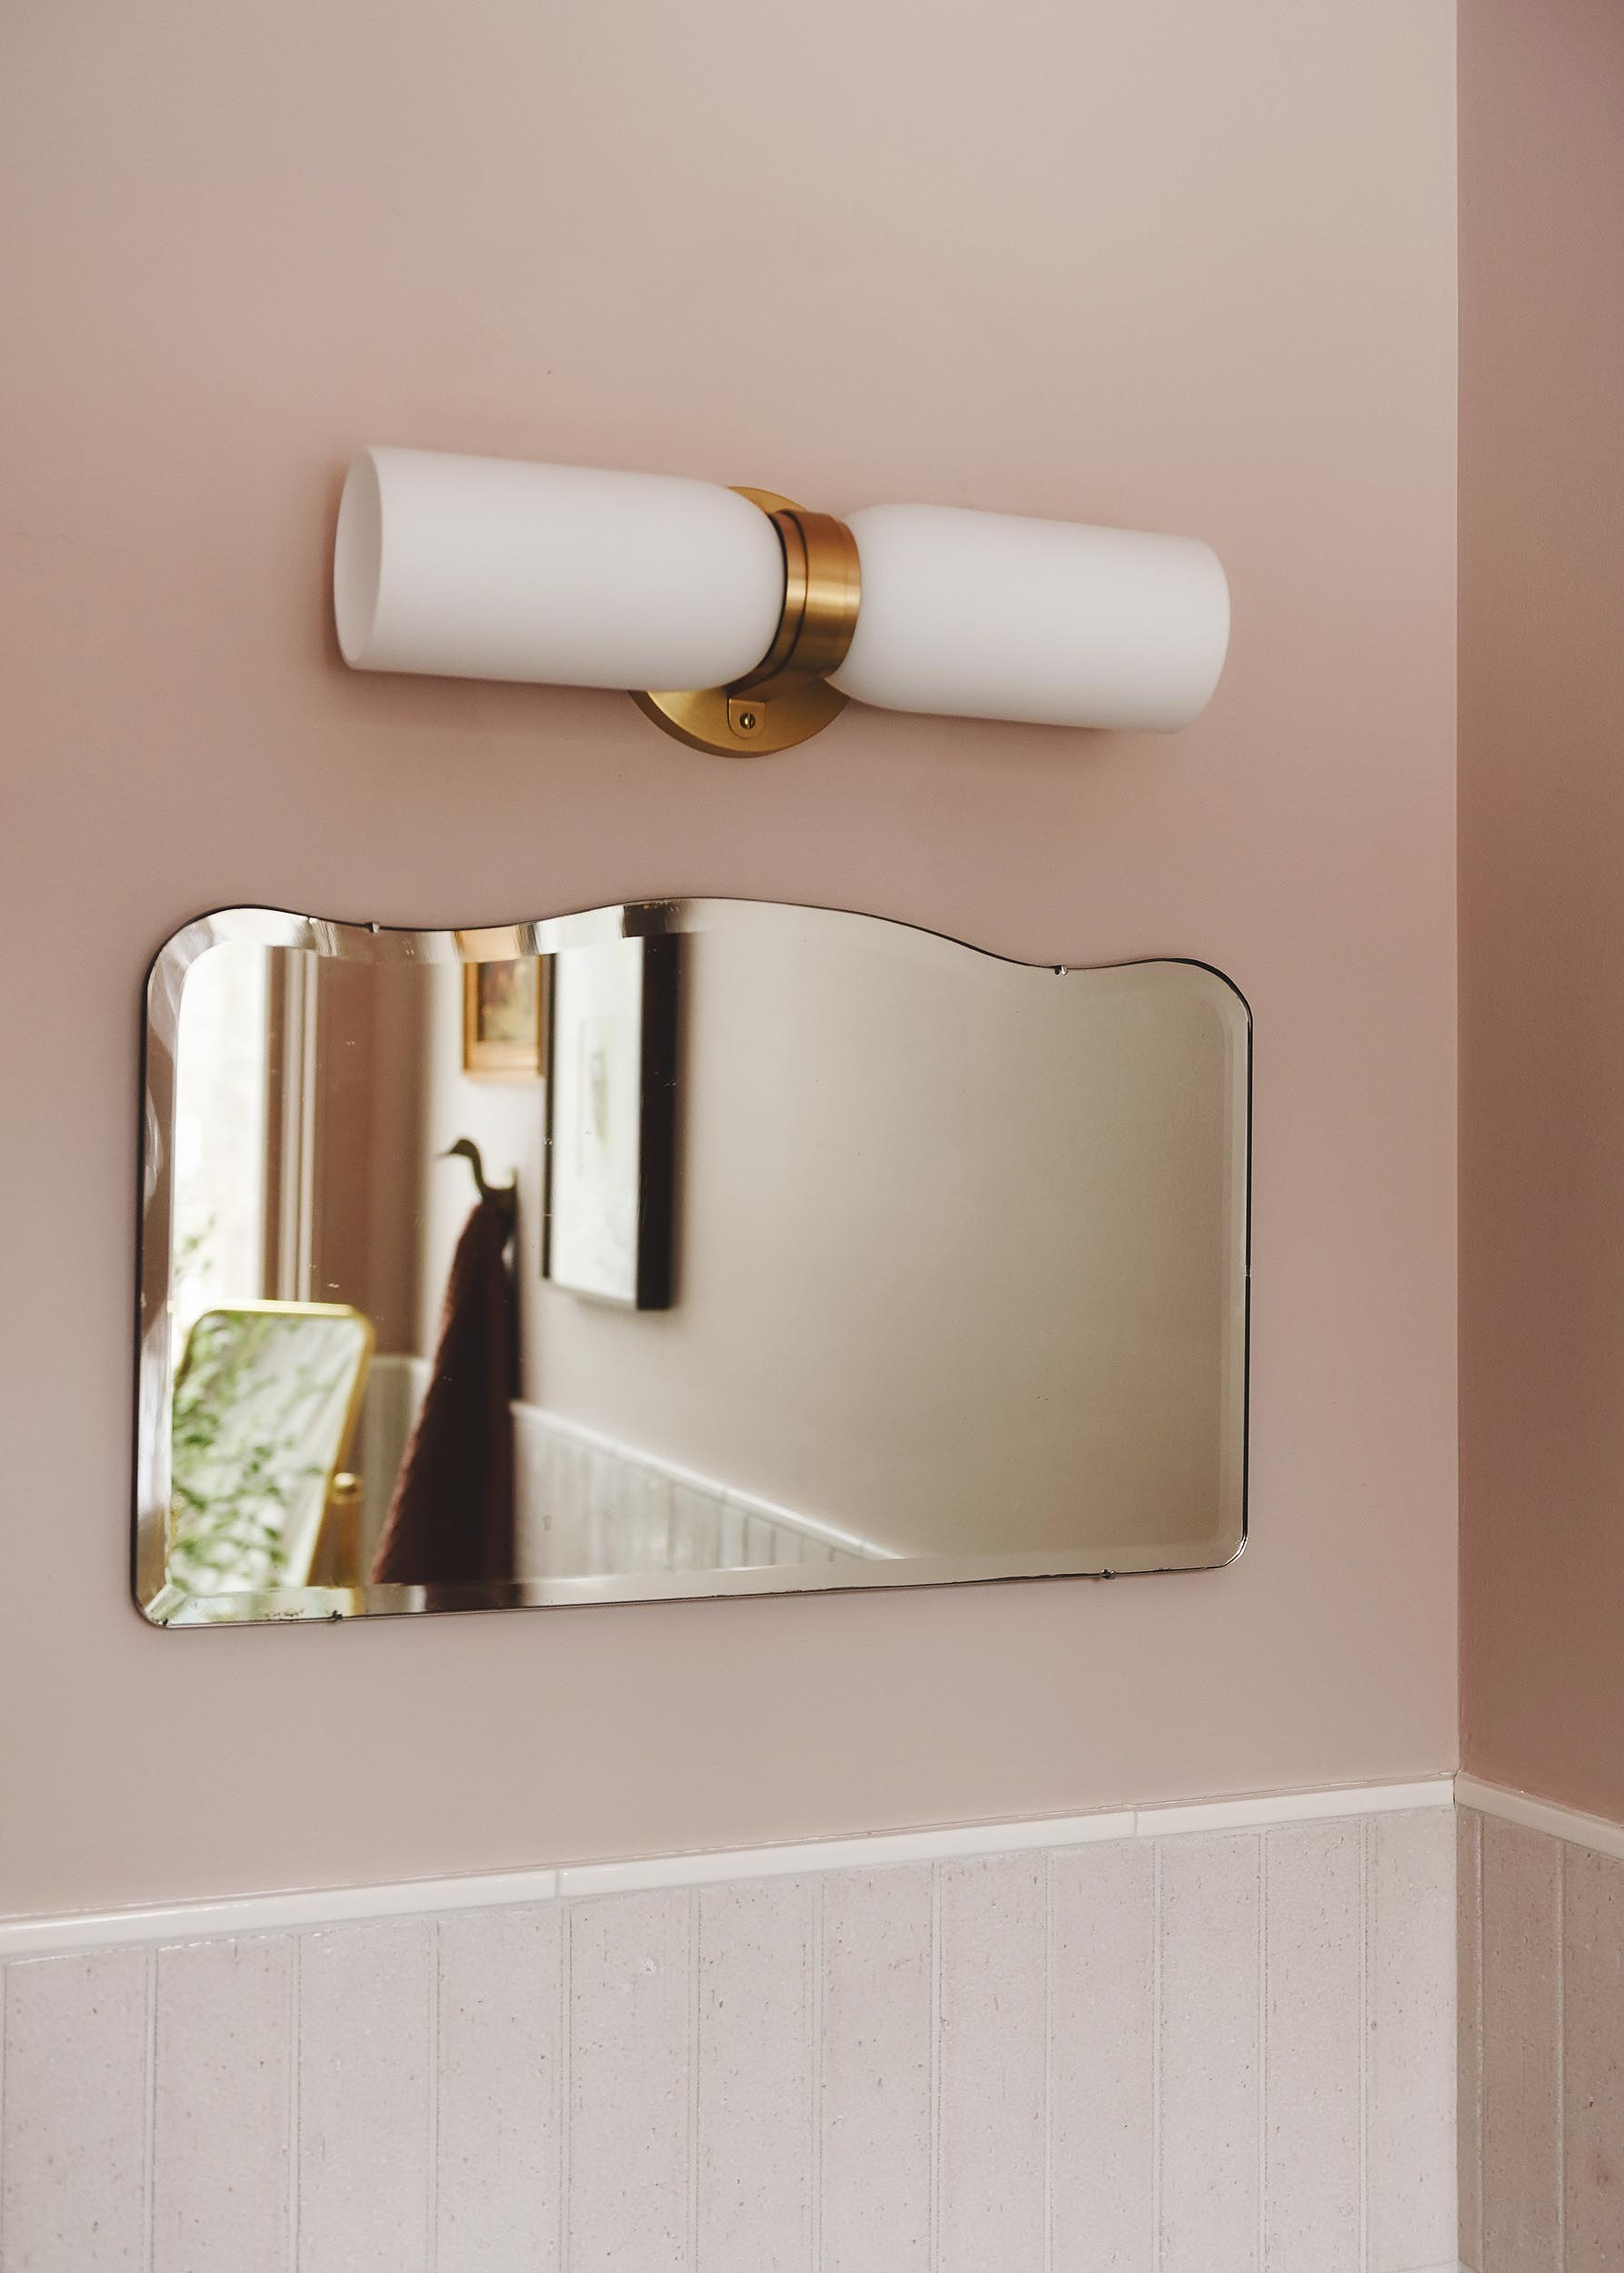 detail of vintage mirror and brass sconce in pink bathroom | via Yellow Brick Home